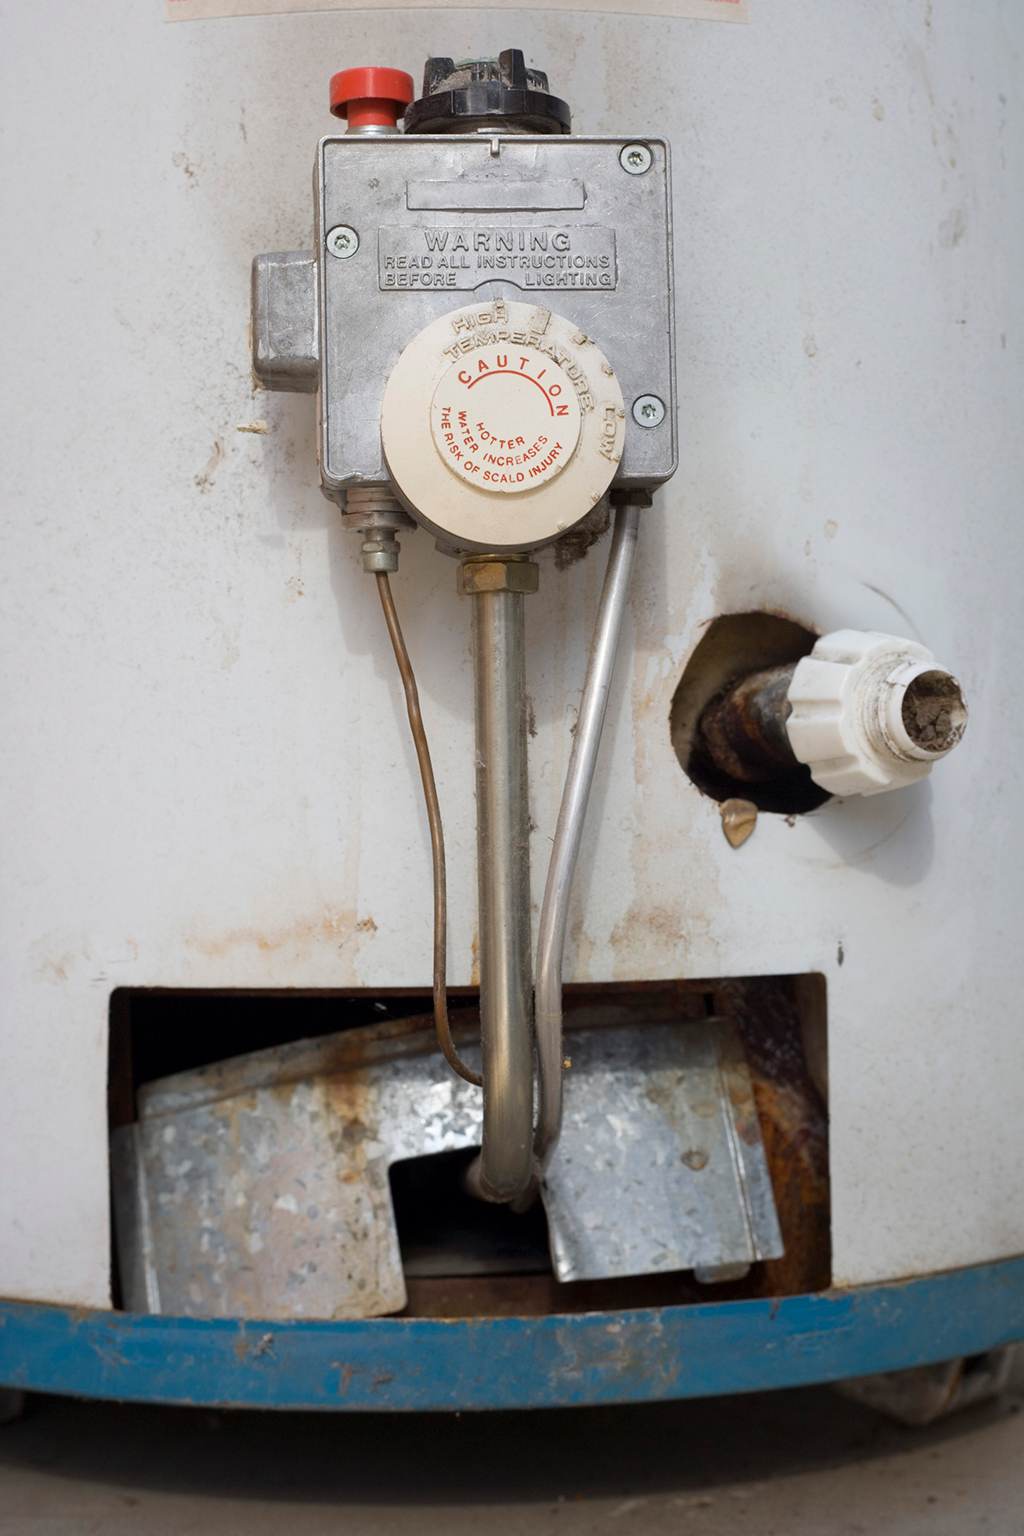 Why Is My Water Heater Leaking? Common Water Heater Leaks Causes And Needs For Water Heater Repair | Myrtle Beach, SC